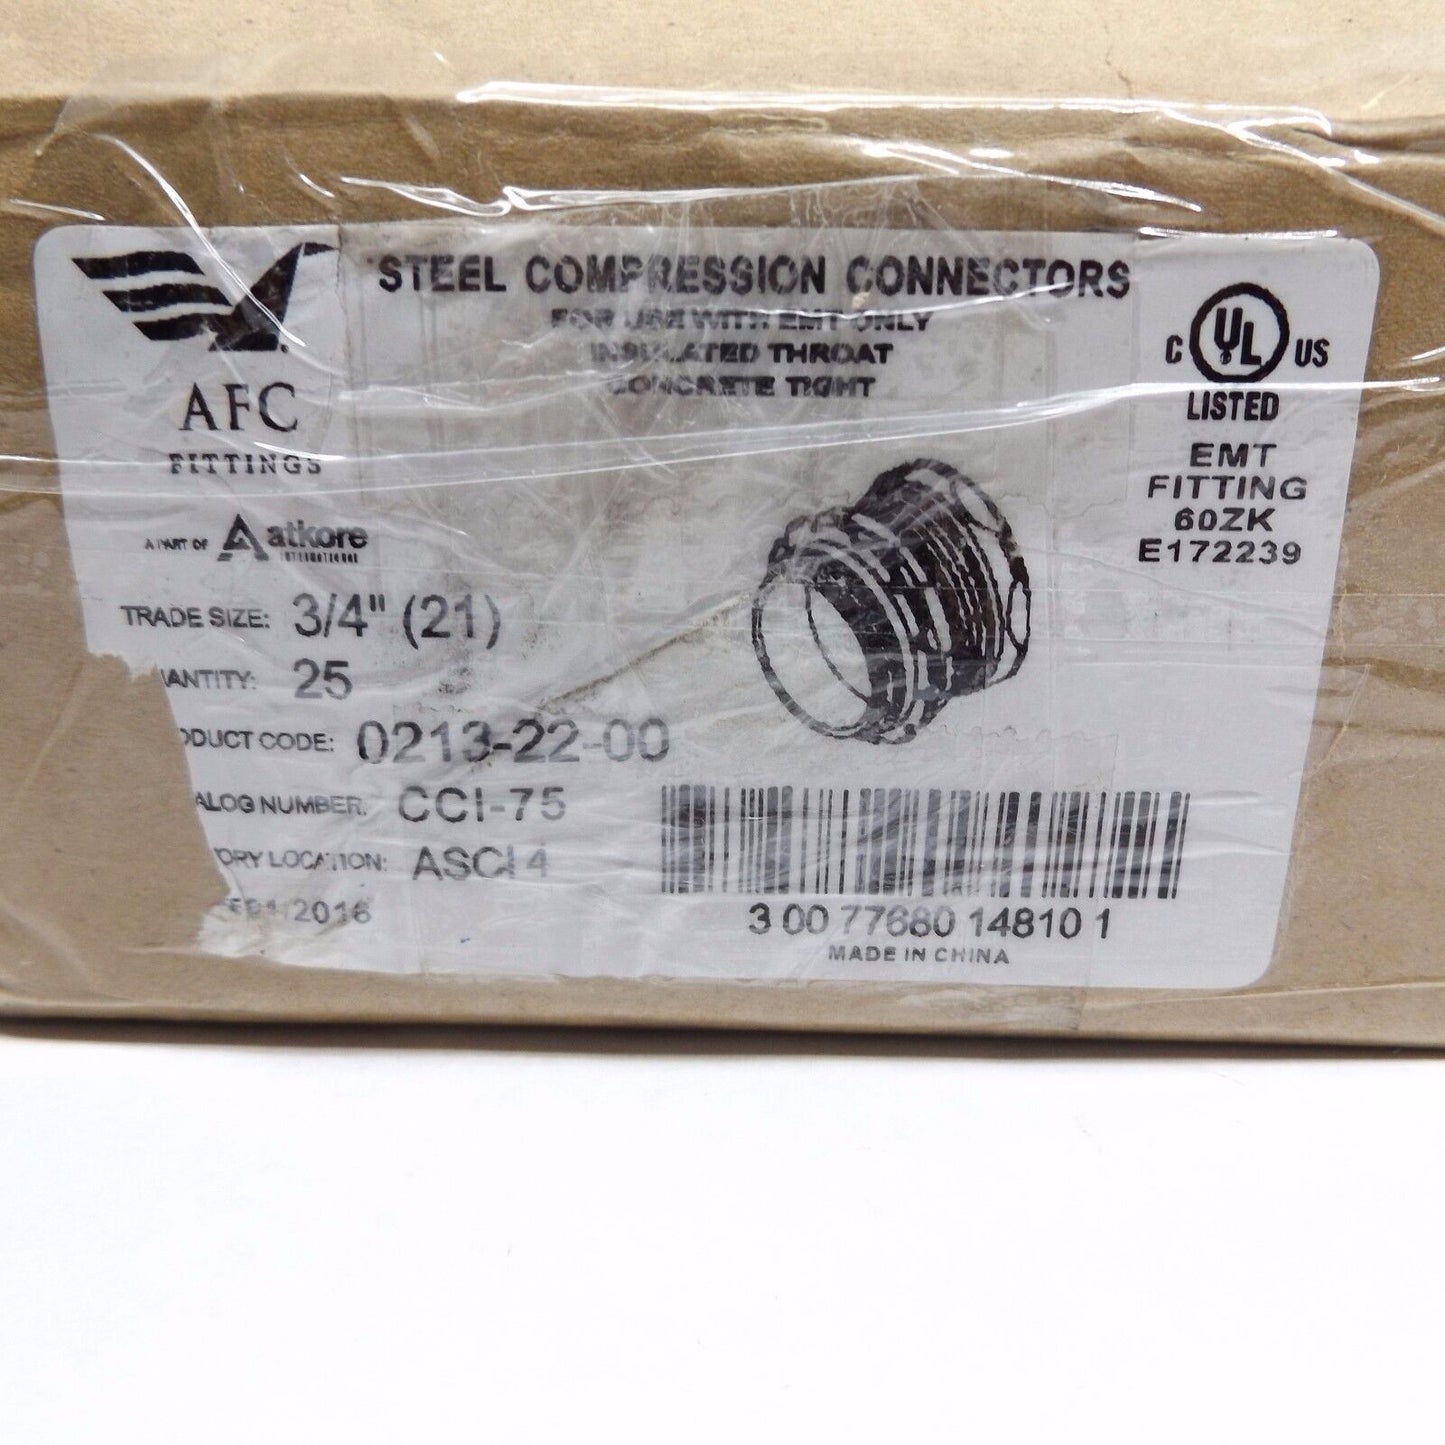 BOX OF 25 AFC 0213-22-00 EMT COMPRESSION CONNECTOR 3/4" INSULATED STEEL